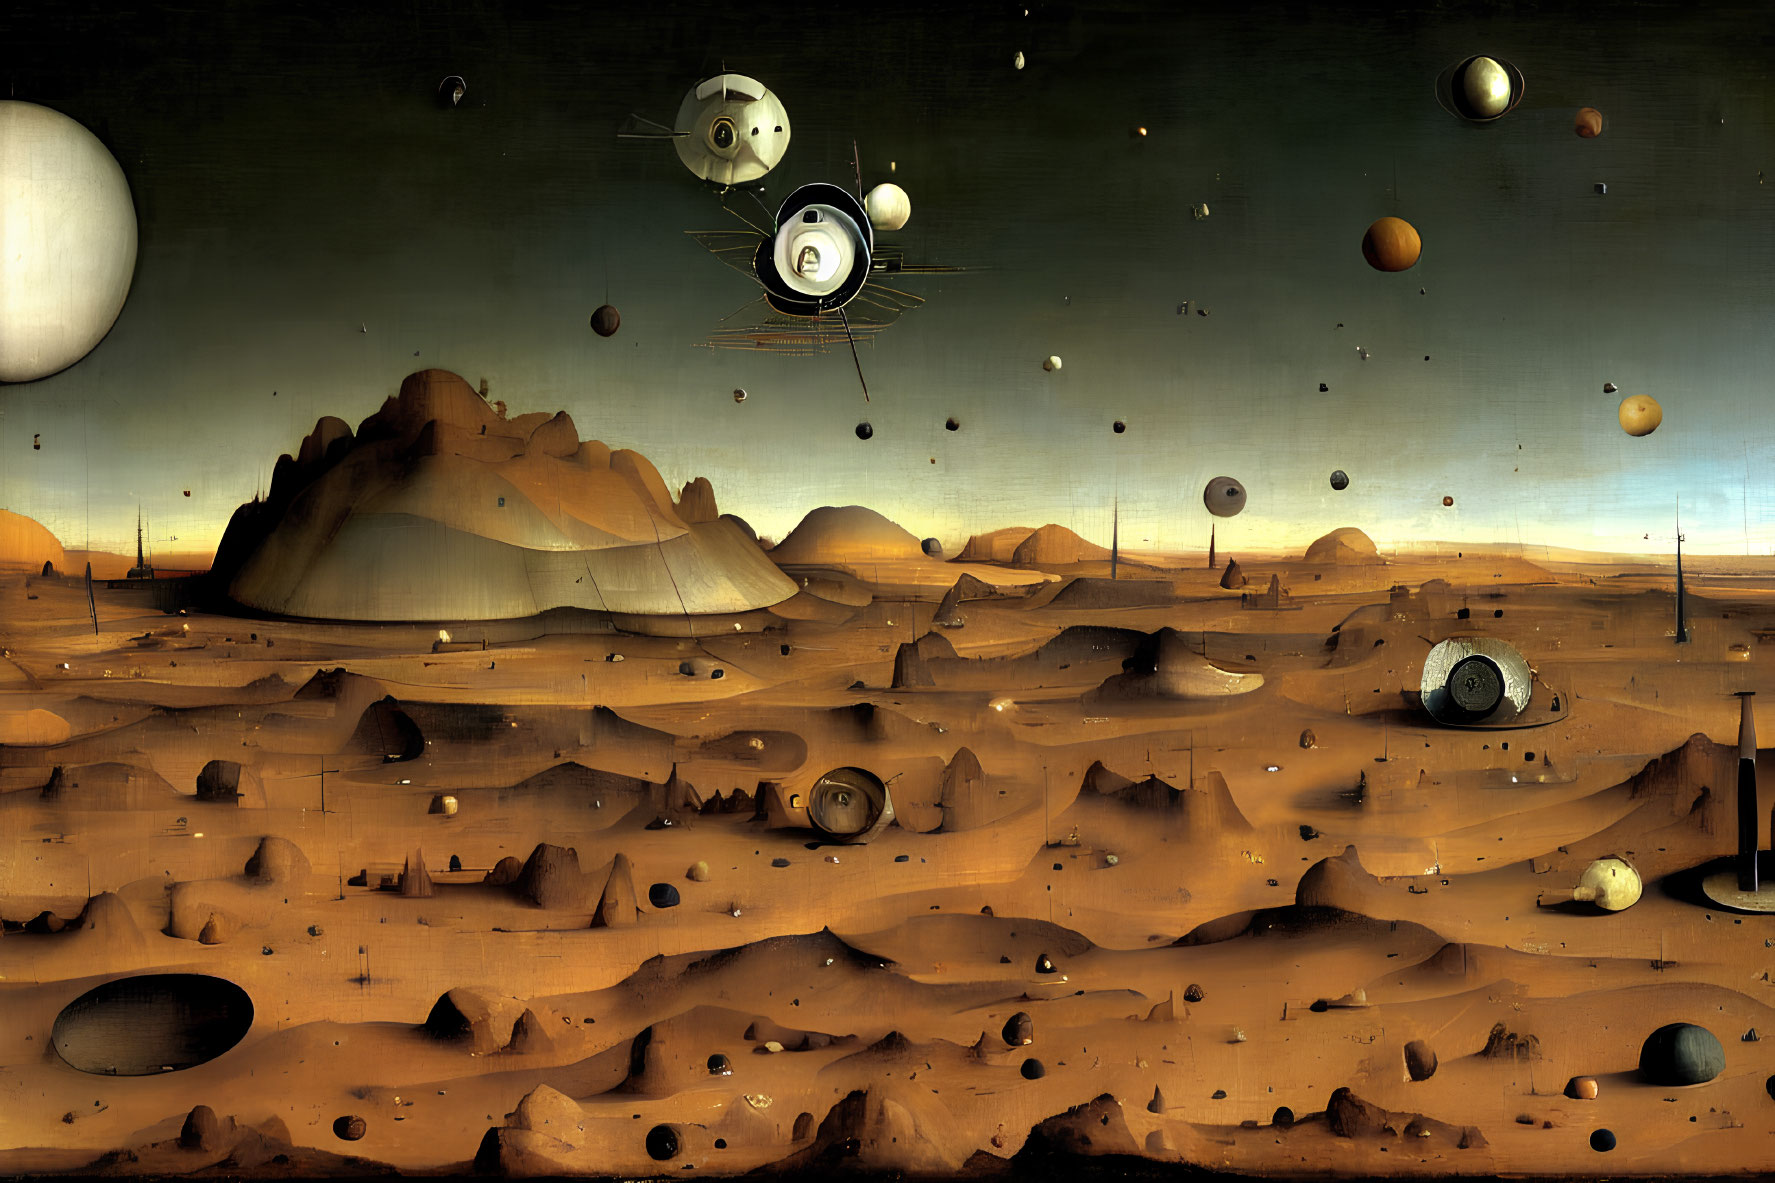 Extraterrestrial landscape with starship, planets, moons, and floating rocks